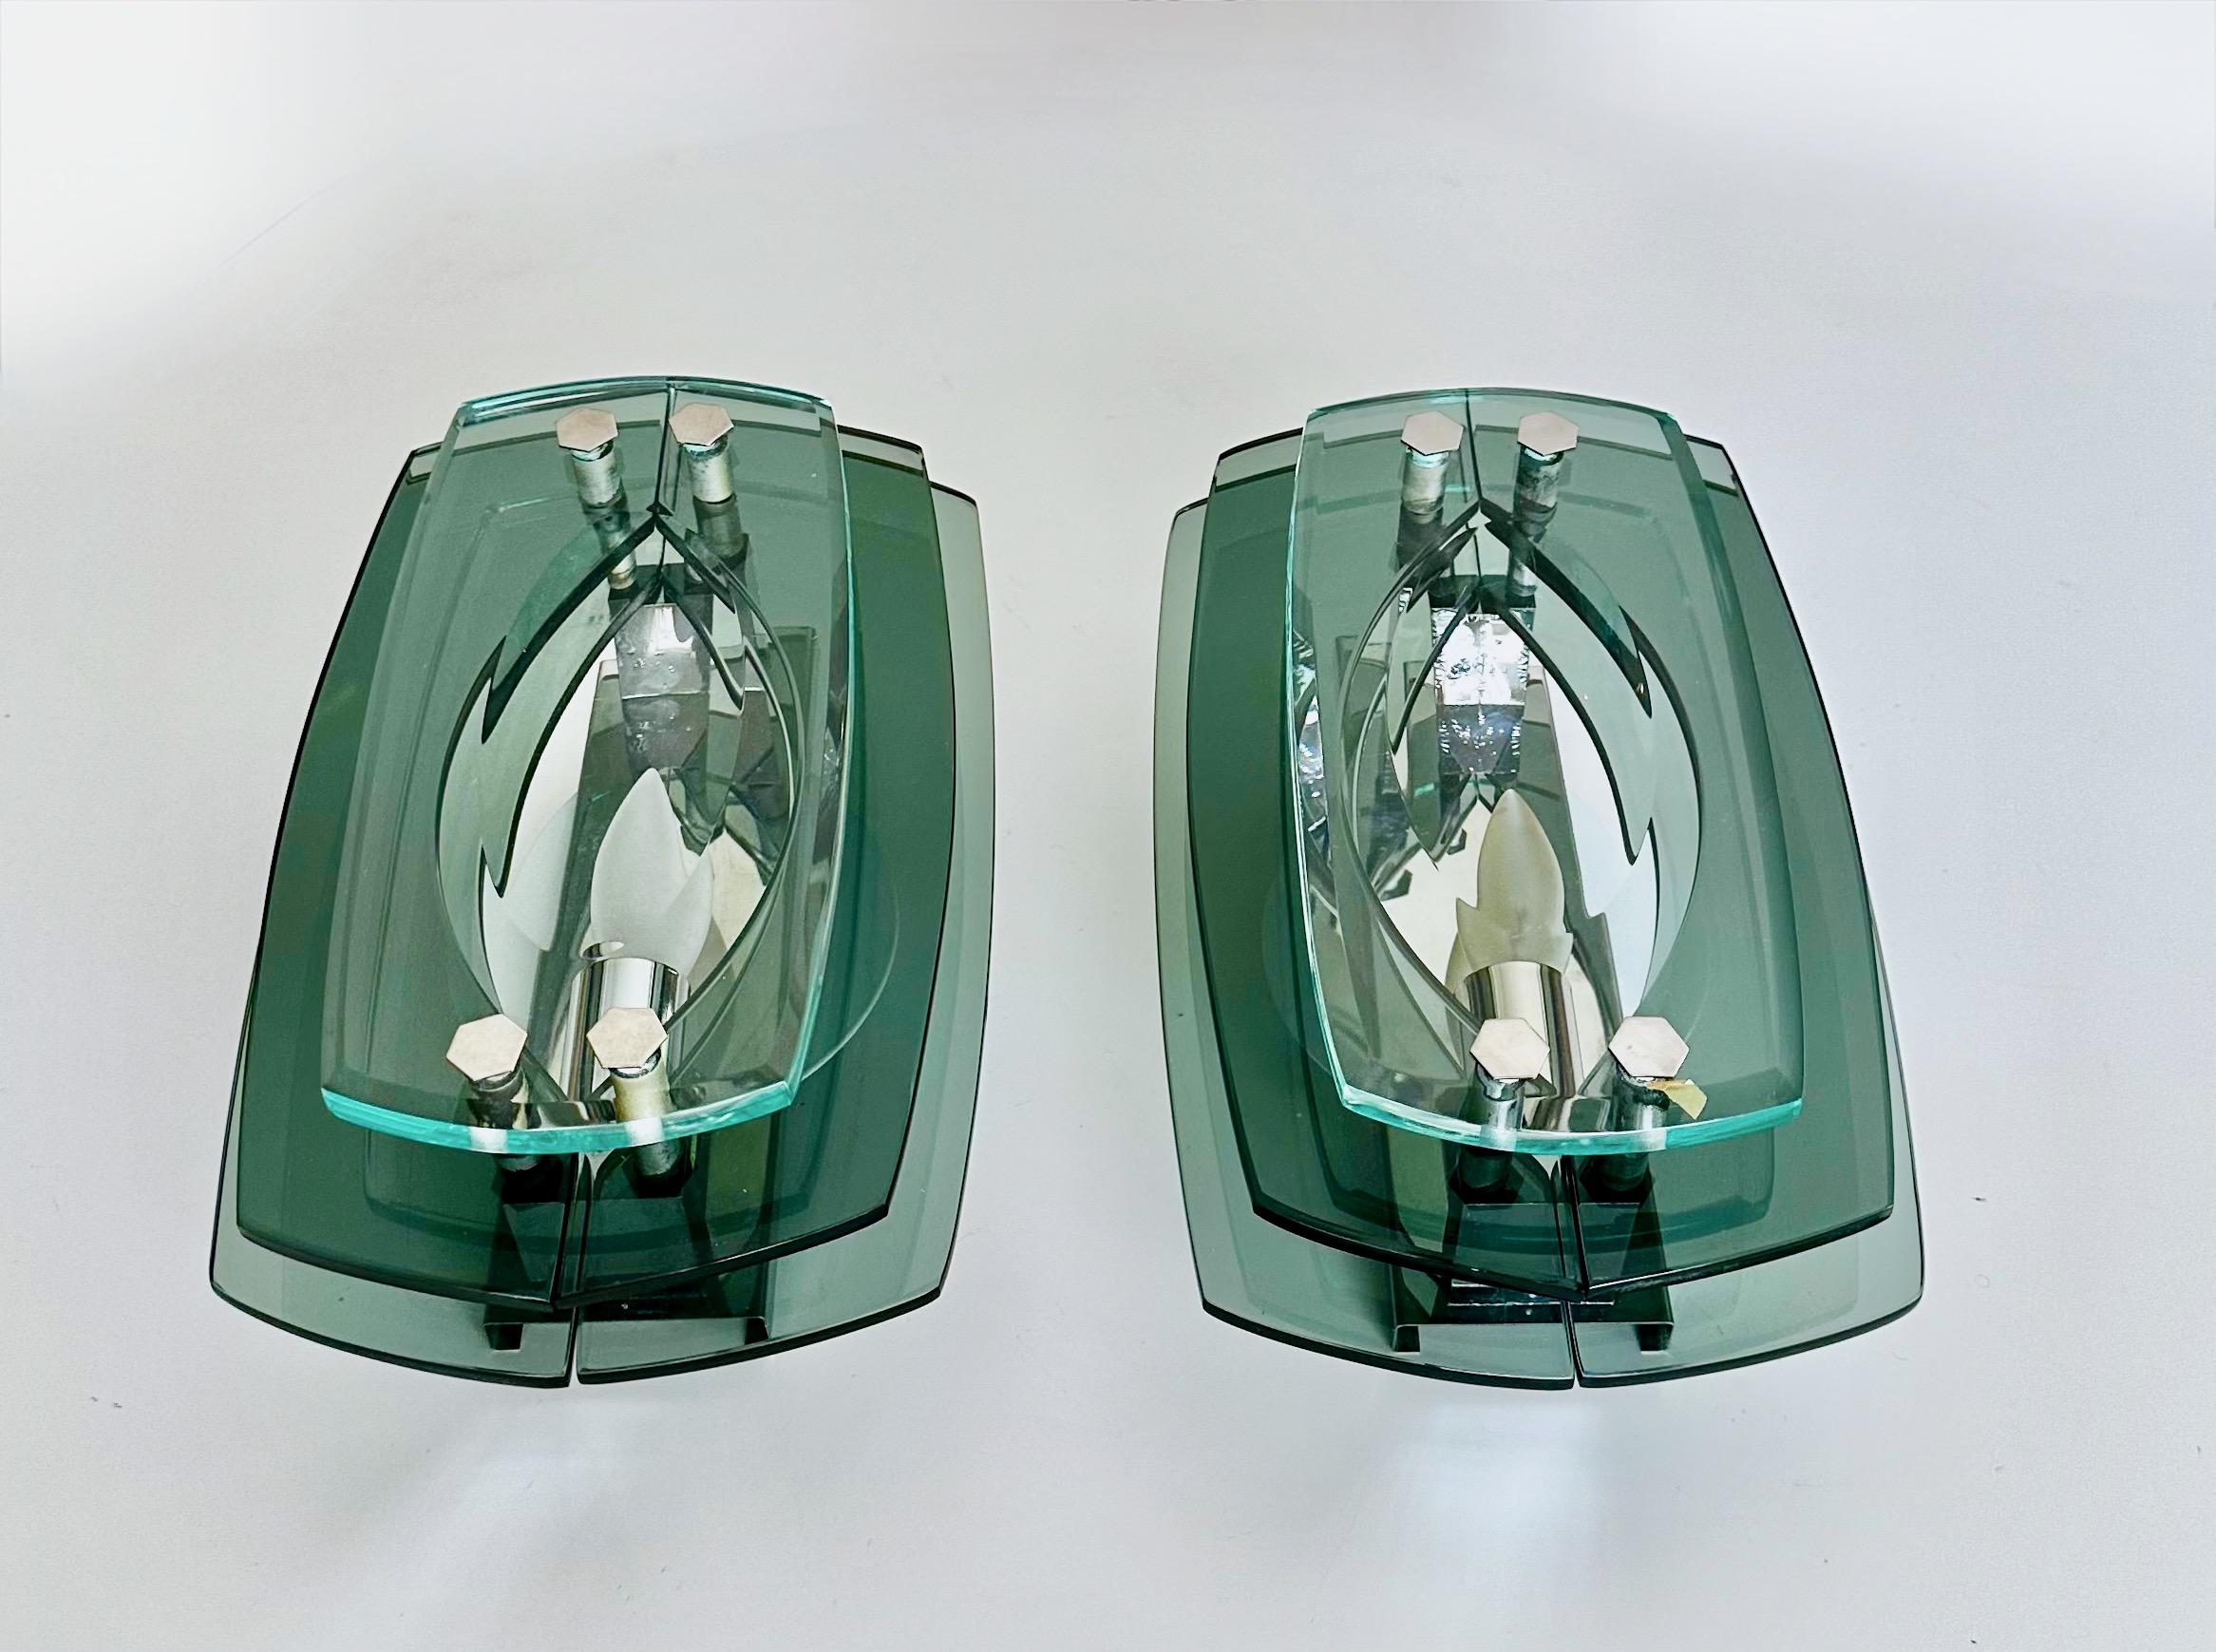 Pair of modern mid century Italian made sconces in the style of Fontana Arte, three layers of translucent shades of greenish color glass with chrome-plated fittings and backplate. Takes one candelabra E12 size bulb, newly wired. The fixture hangs on